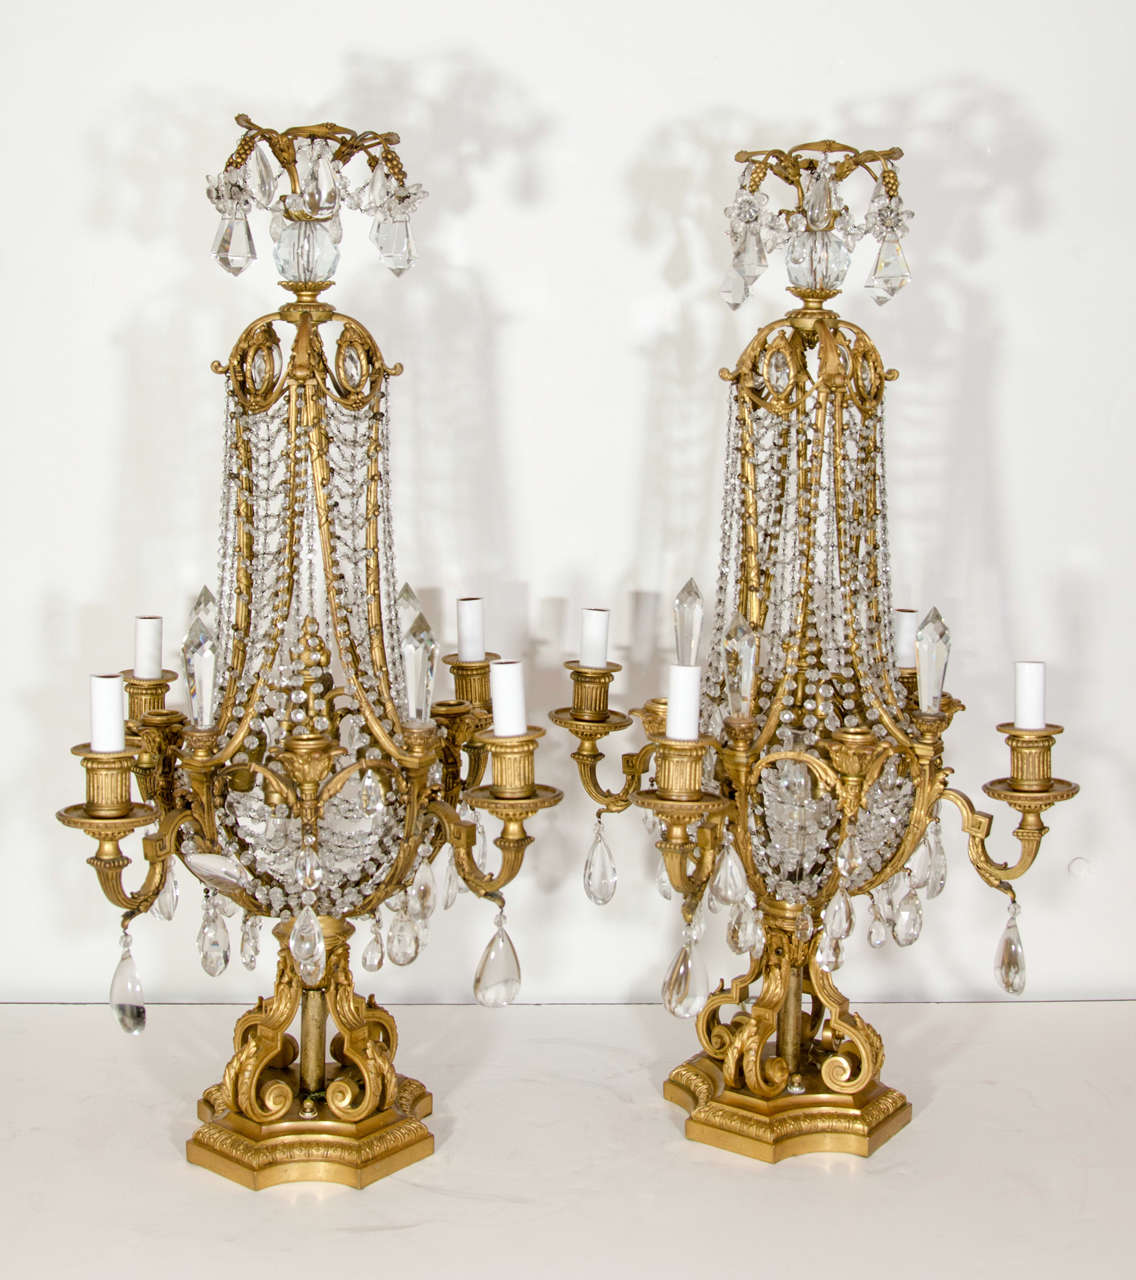 Pair of superb large Antique French Louis XVI style gilt bronze & cut crystal candelabra lamps embellished with crystal chains & cut crystal prisms.